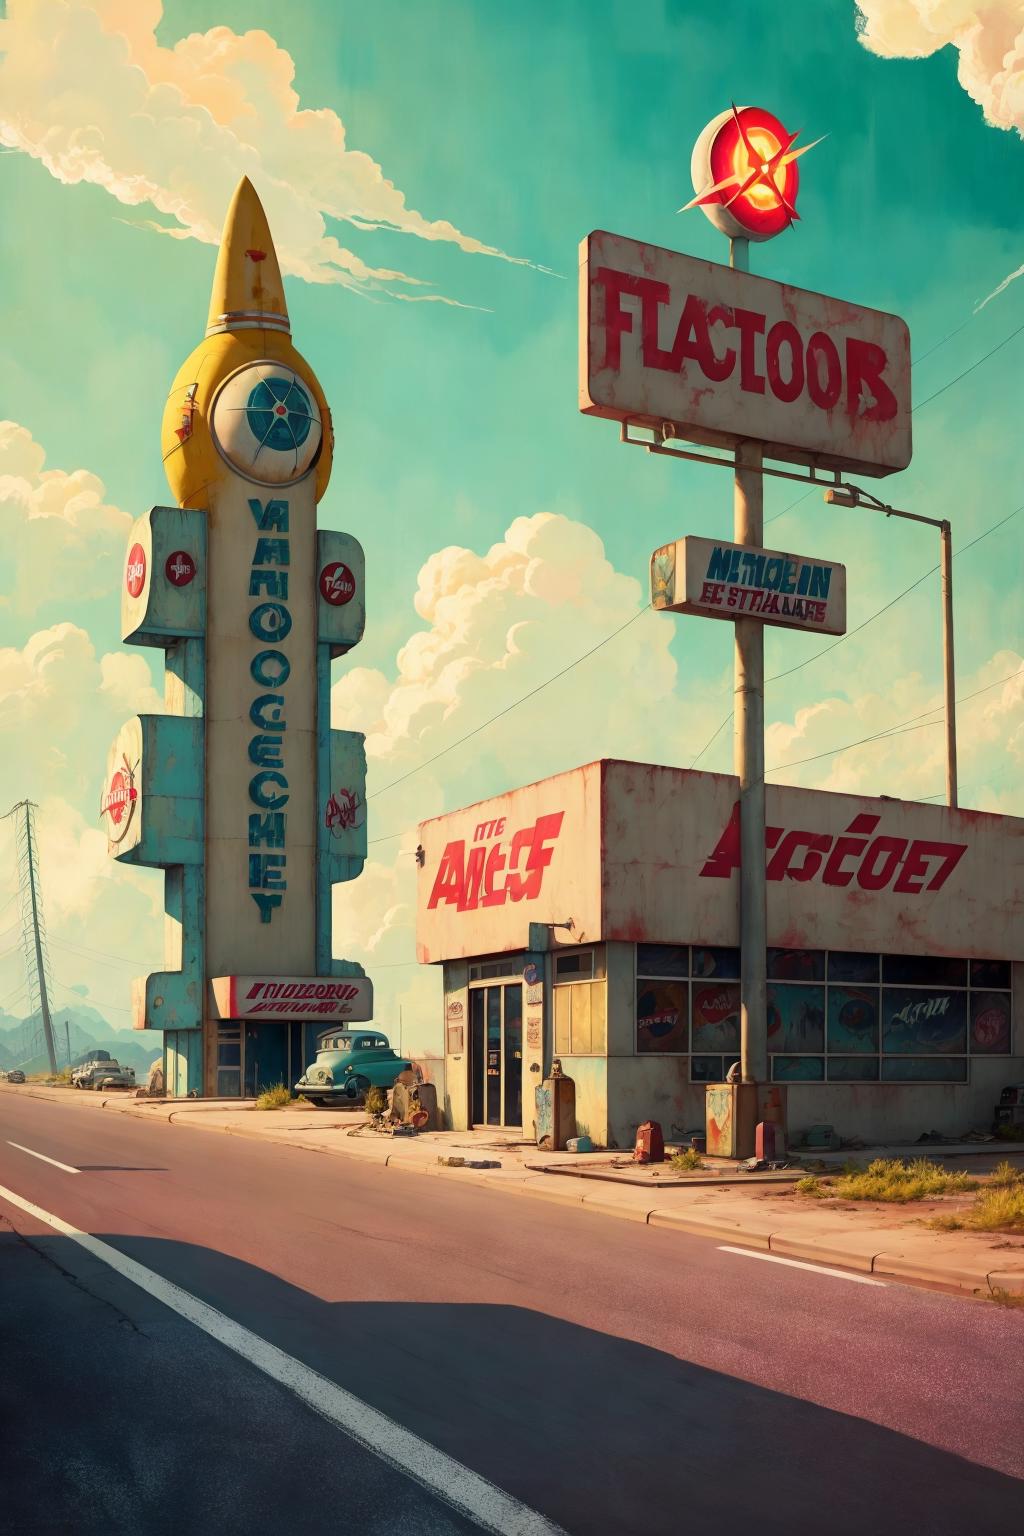 A Fictional Town with a Space Rocket, Miniature Gas Station, and Retail Store